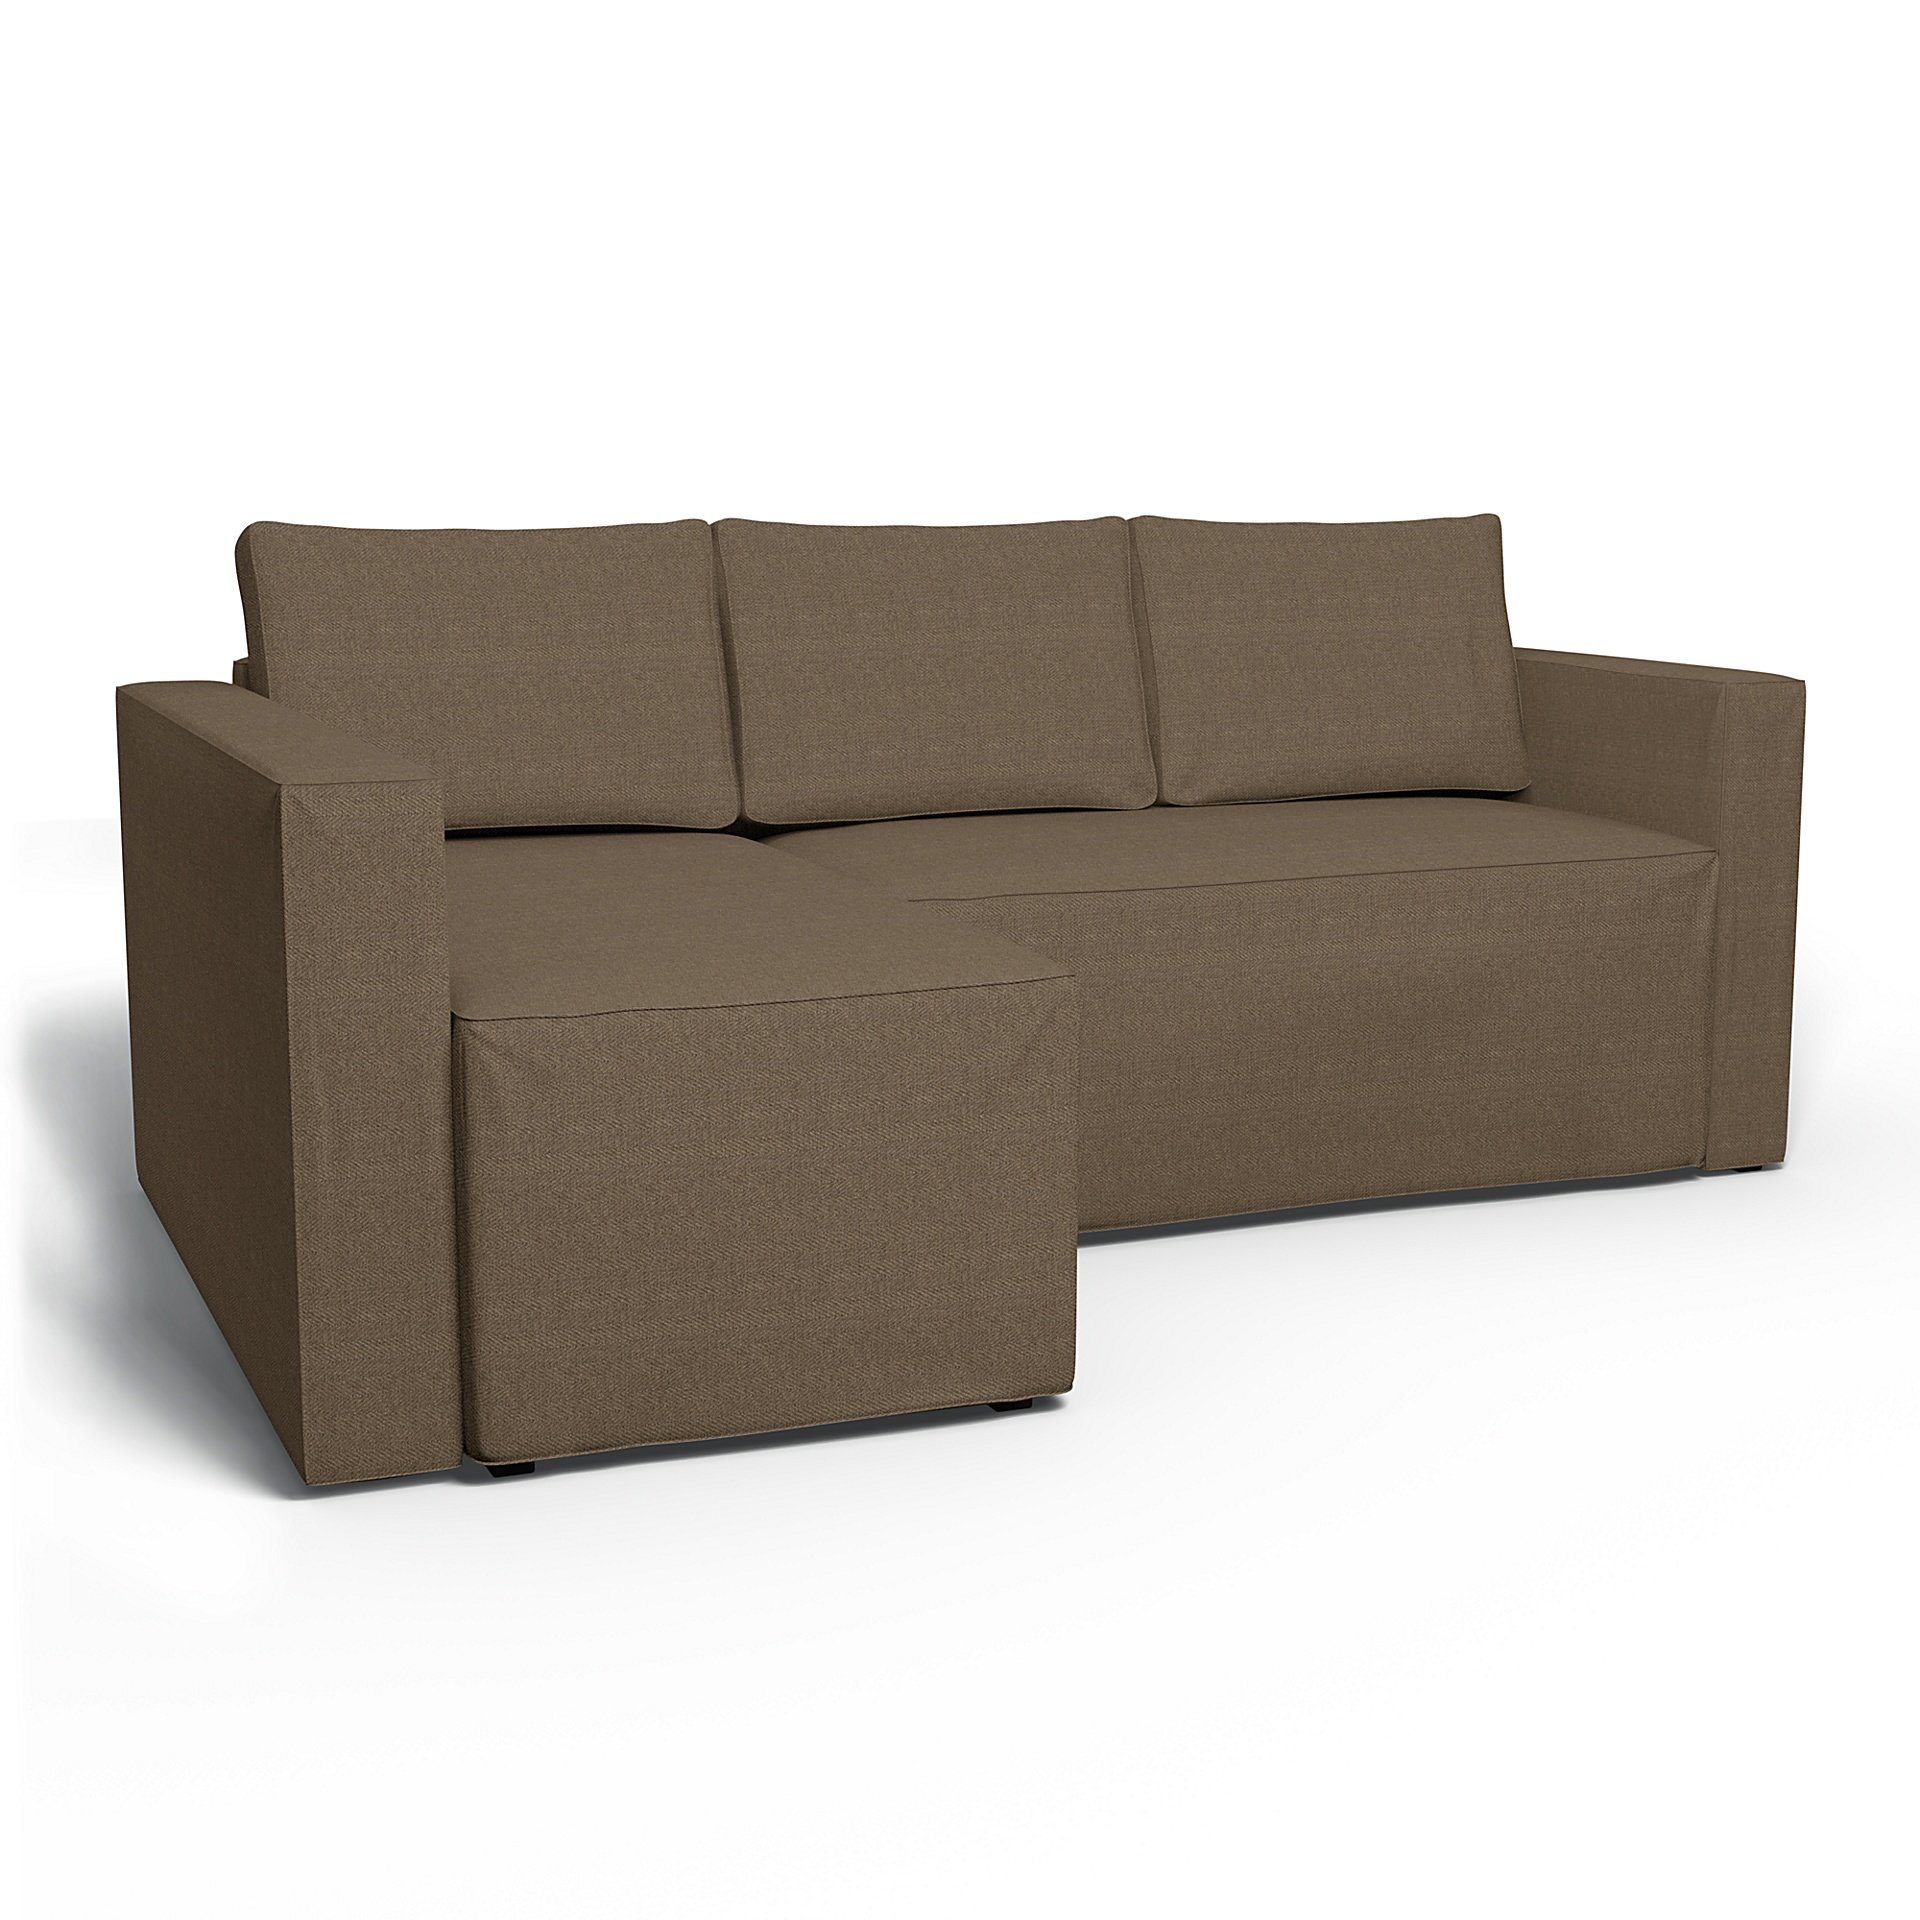 IKEA - Manstad Sofa Bed with Left Chaise Cover, Dark Taupe, Boucle & Texture - Bemz